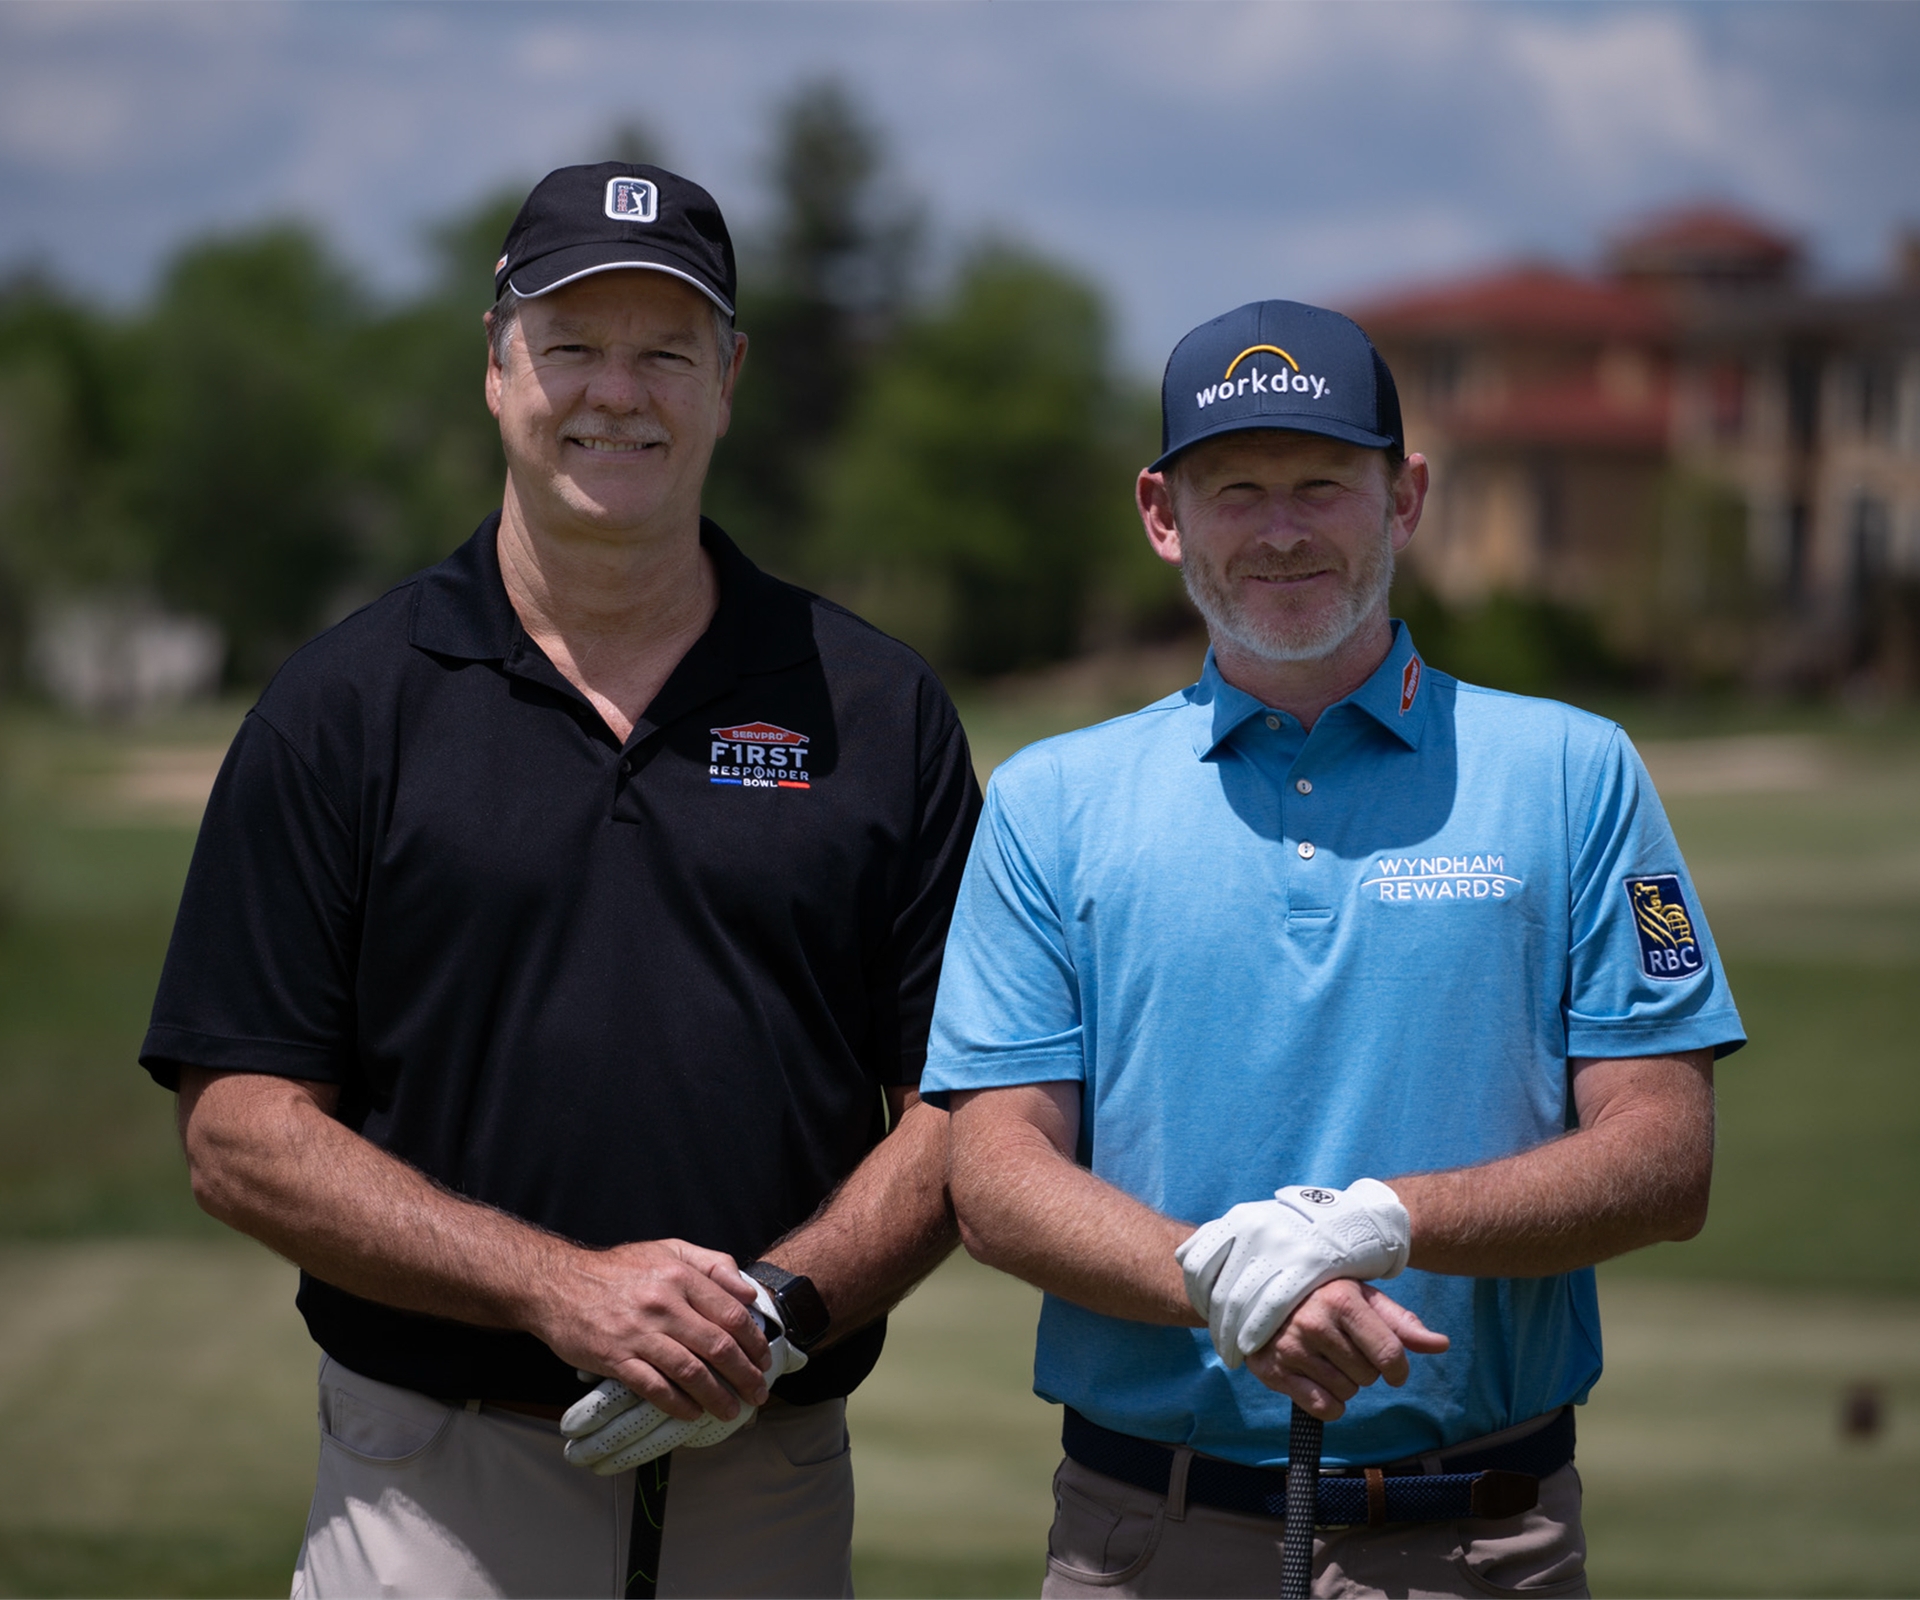 2 men facing the camera with golf clubs in their hands